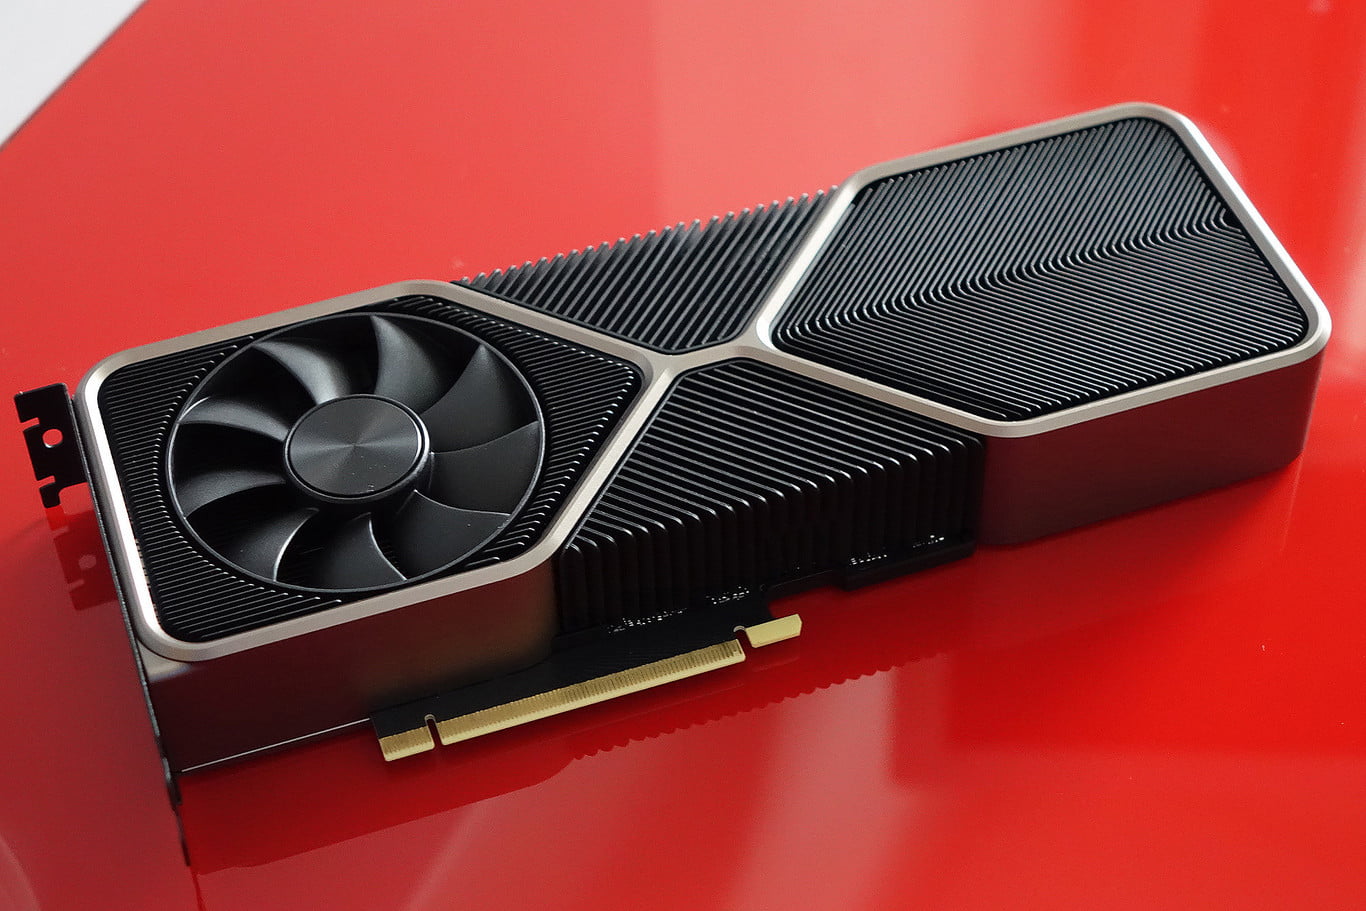 NVIDIA GeForce RTX 3080 full specifications